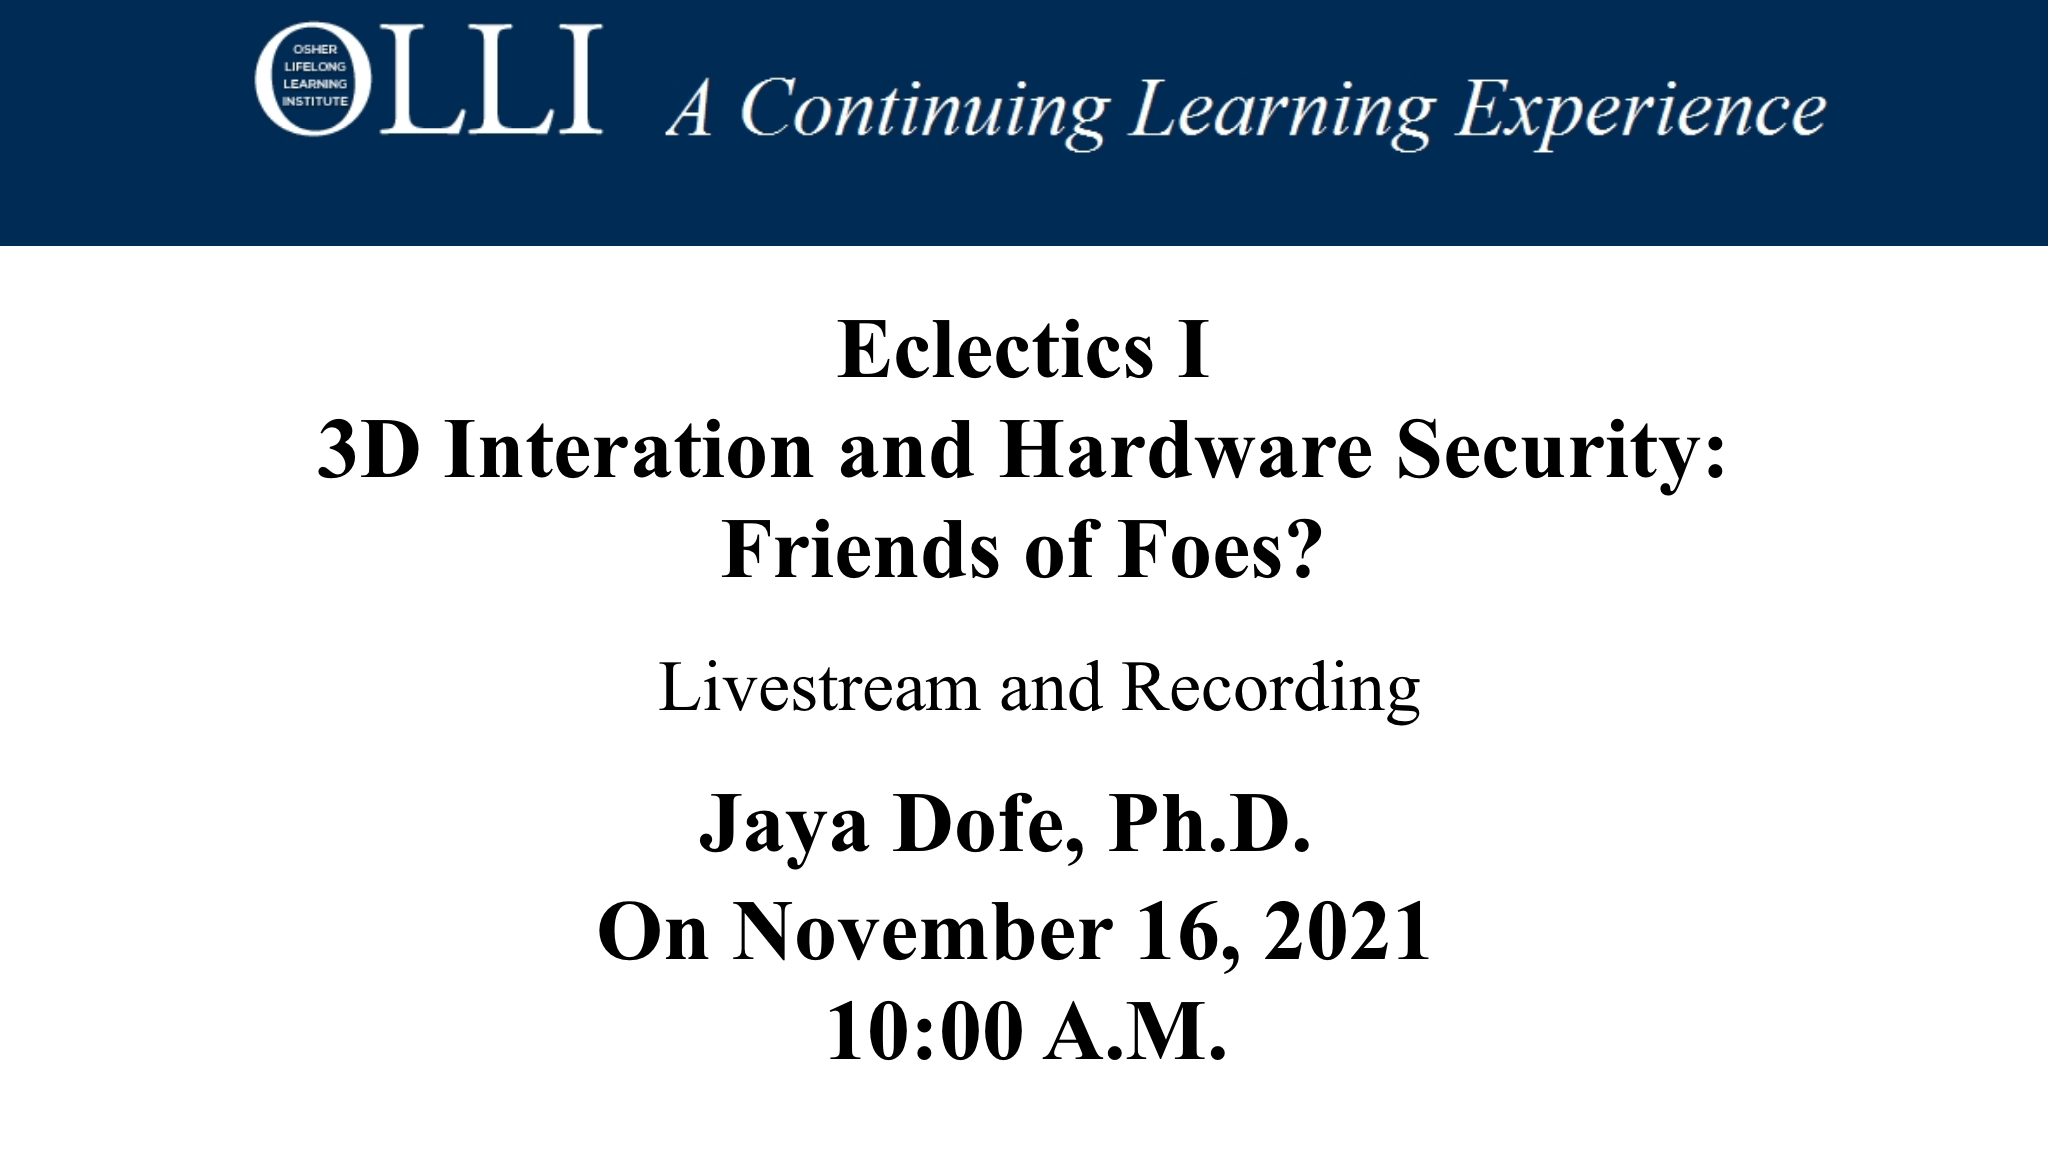 Click here to view the livestream of Eclectics - #D Intefration and Hardware Security